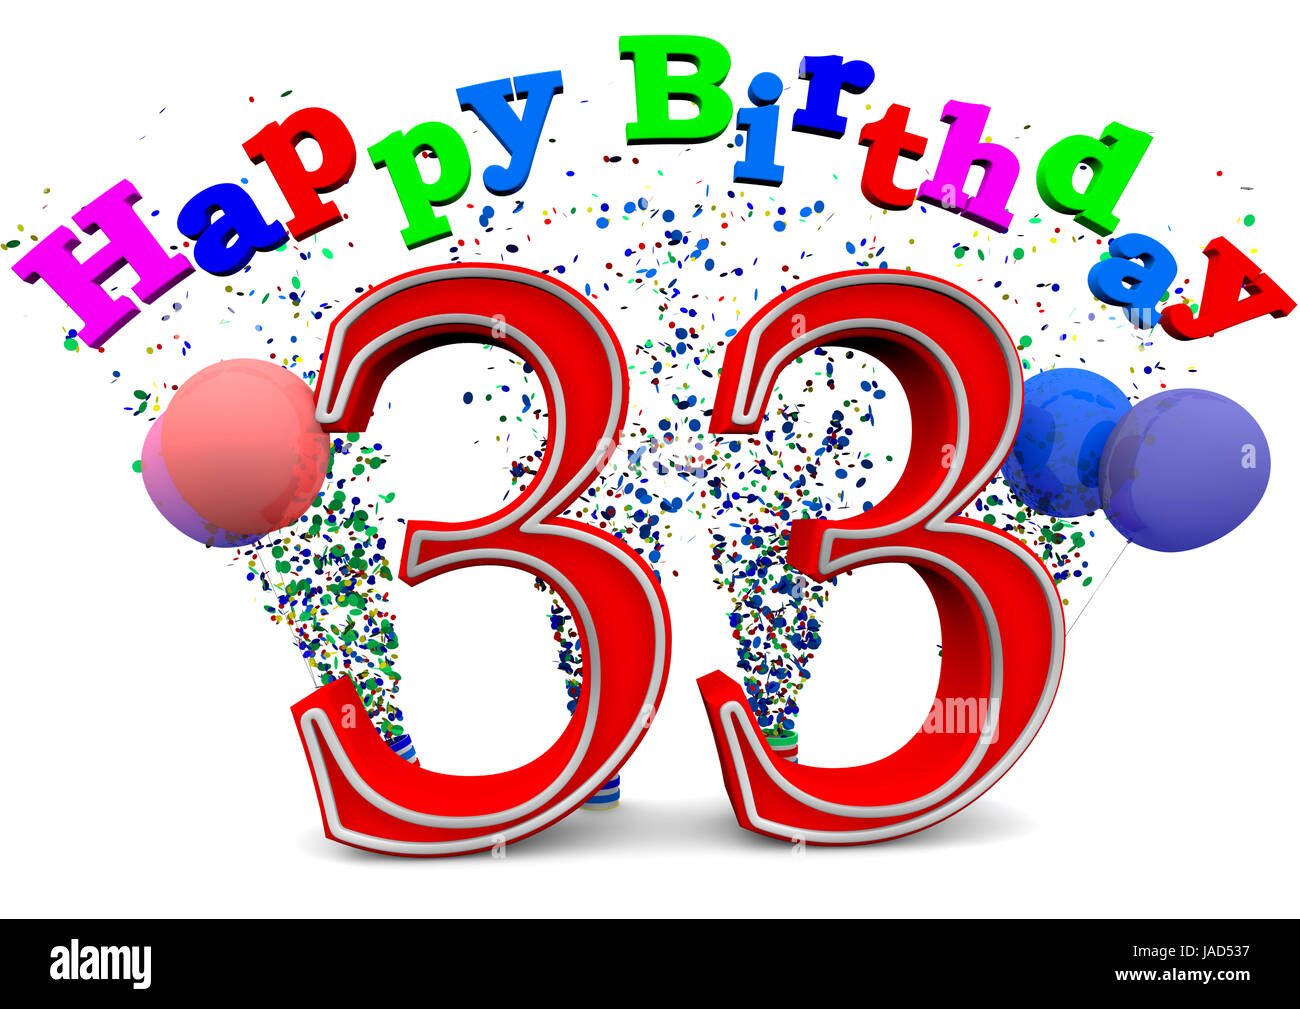 a-33-with-happy-birthday-and-balloons-stock-photo-alamy